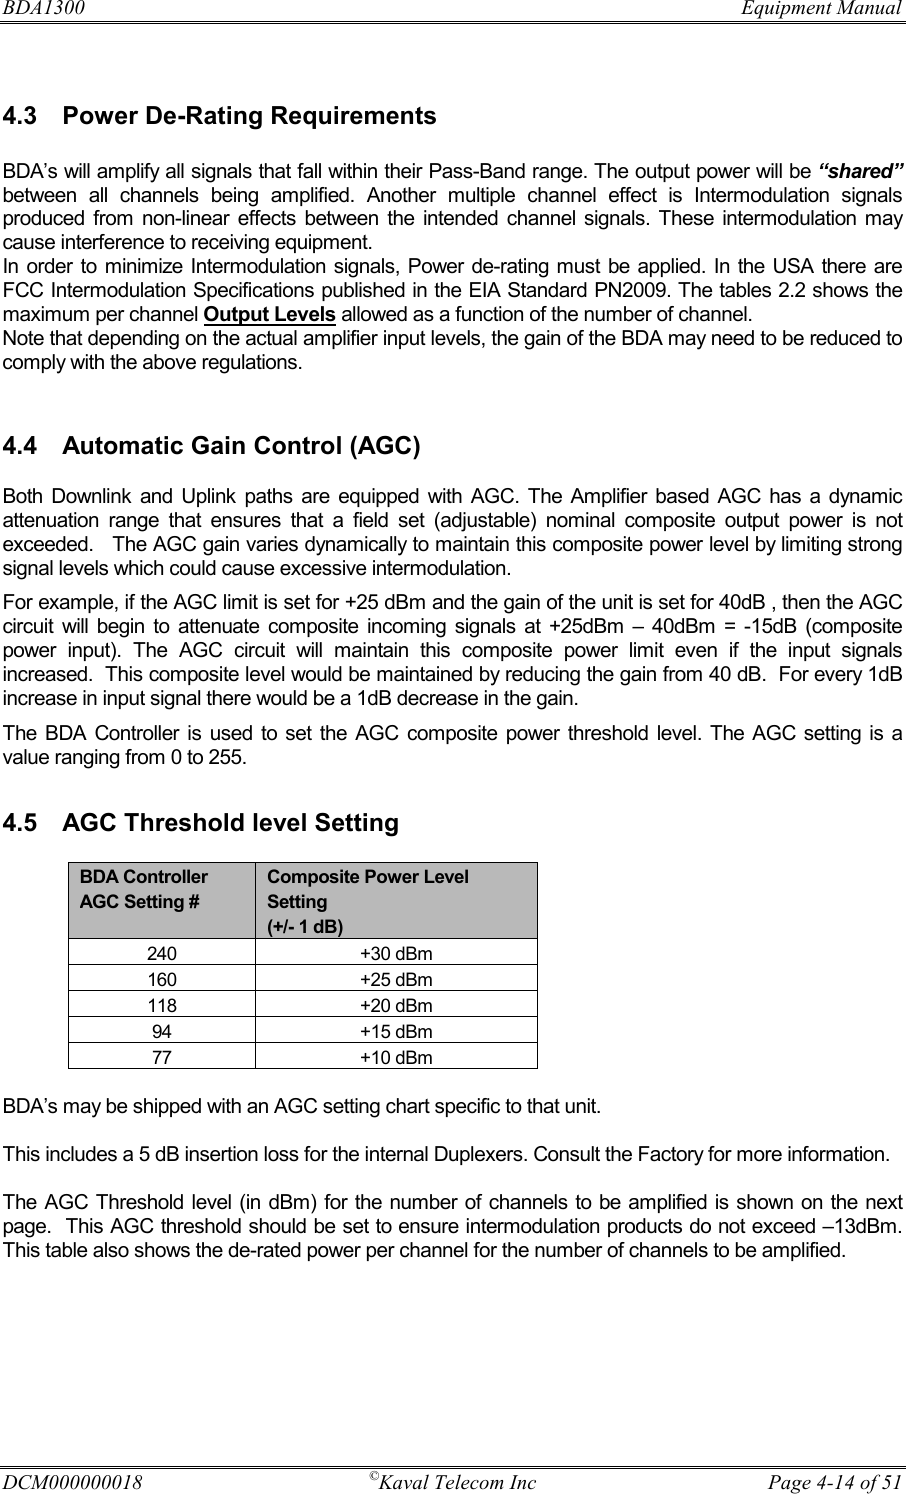 BDA1300              Equipment Manual DCM000000018  ©Kaval Telecom Inc  Page 4-14 of 51  4.3  Power De-Rating Requirements  BDA’s will amplify all signals that fall within their Pass-Band range. The output power will be “shared” between all channels being amplified. Another multiple channel effect is Intermodulation signals produced from non-linear effects between the intended channel signals. These intermodulation may cause interference to receiving equipment. In order to minimize Intermodulation signals, Power de-rating must be applied. In the USA there are FCC Intermodulation Specifications published in the EIA Standard PN2009. The tables 2.2 shows the maximum per channel Output Levels allowed as a function of the number of channel. Note that depending on the actual amplifier input levels, the gain of the BDA may need to be reduced to comply with the above regulations.   4.4  Automatic Gain Control (AGC)  Both Downlink and Uplink paths are equipped with AGC. The Amplifier based AGC has a dynamic attenuation range that ensures that a field set (adjustable) nominal composite output power is not exceeded.   The AGC gain varies dynamically to maintain this composite power level by limiting strong signal levels which could cause excessive intermodulation.  For example, if the AGC limit is set for +25 dBm and the gain of the unit is set for 40dB , then the AGC circuit will begin to attenuate composite incoming signals at +25dBm – 40dBm = -15dB (composite power input). The AGC circuit will maintain this composite power limit even if the input signals increased.  This composite level would be maintained by reducing the gain from 40 dB.  For every 1dB increase in input signal there would be a 1dB decrease in the gain.   The BDA Controller is used to set the AGC composite power threshold level. The AGC setting is a value ranging from 0 to 255.  4.5  AGC Threshold level Setting    BDA’s may be shipped with an AGC setting chart specific to that unit.  This includes a 5 dB insertion loss for the internal Duplexers. Consult the Factory for more information.  The AGC Threshold level (in dBm) for the number of channels to be amplified is shown on the next page.  This AGC threshold should be set to ensure intermodulation products do not exceed –13dBm.  This table also shows the de-rated power per channel for the number of channels to be amplified. BDA Controller AGC Setting # Composite Power Level Setting (+/- 1 dB) 240 +30 dBm 160 +25 dBm 118 +20 dBm 94 +15 dBm 77 +10 dBm 